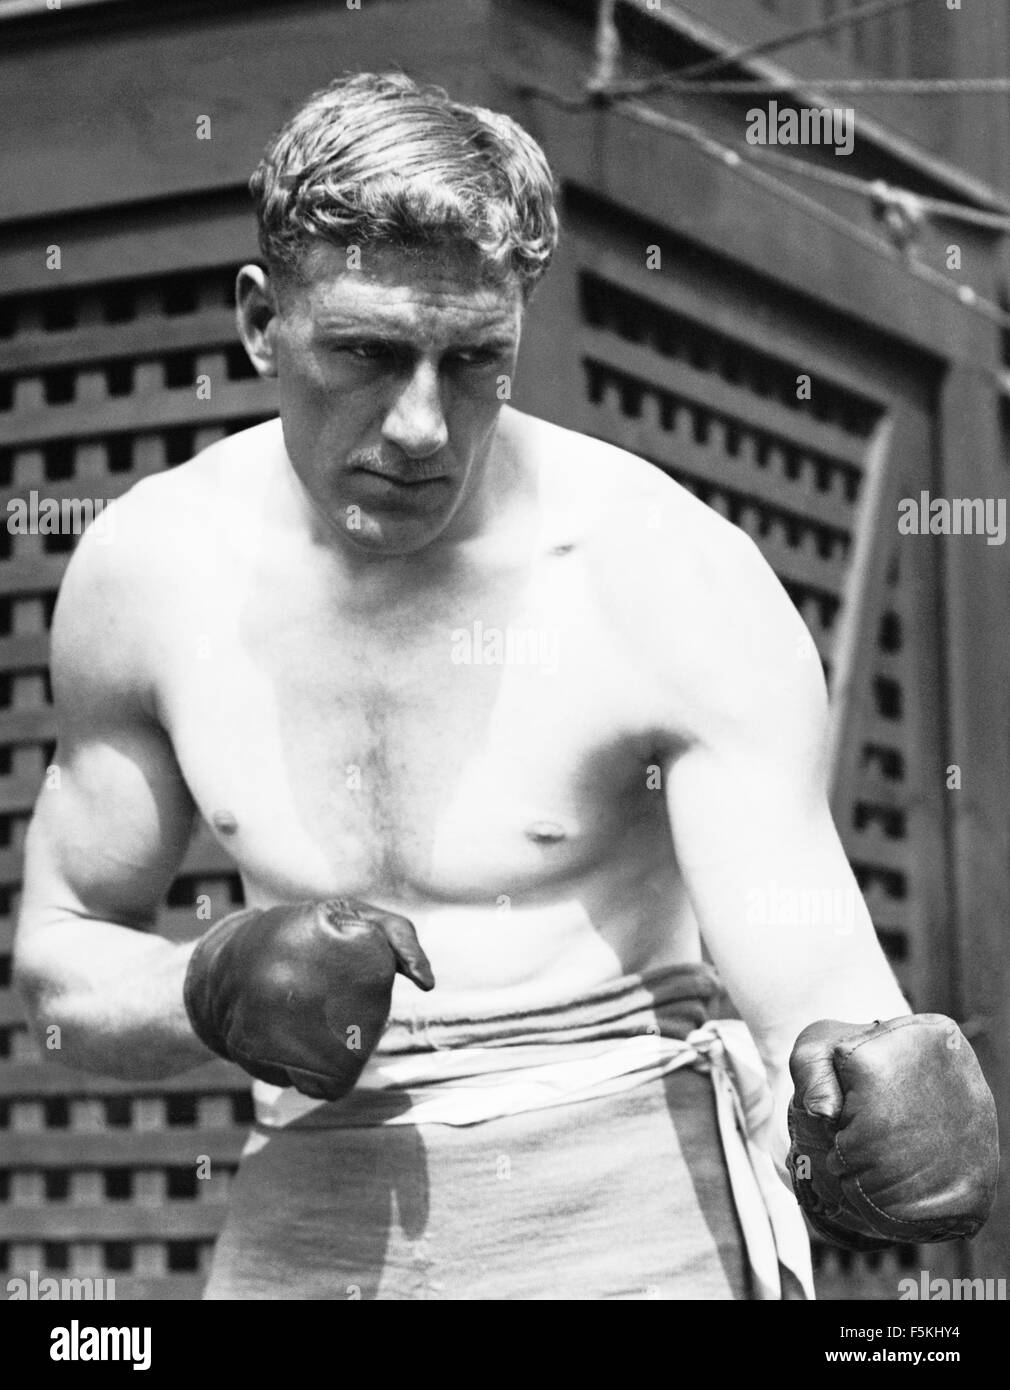 Vintage photo of English heavyweight boxer Bombardier Billy Wells (1889 - 1967). Wells, from the East End of London, was British and British Empire Heavyweight Champion from 1911 to 1919. He was also famous for being an early Rank 'gongman' - the person seen striking the large gong at the beginning of Rank Organisation films. Stock Photo